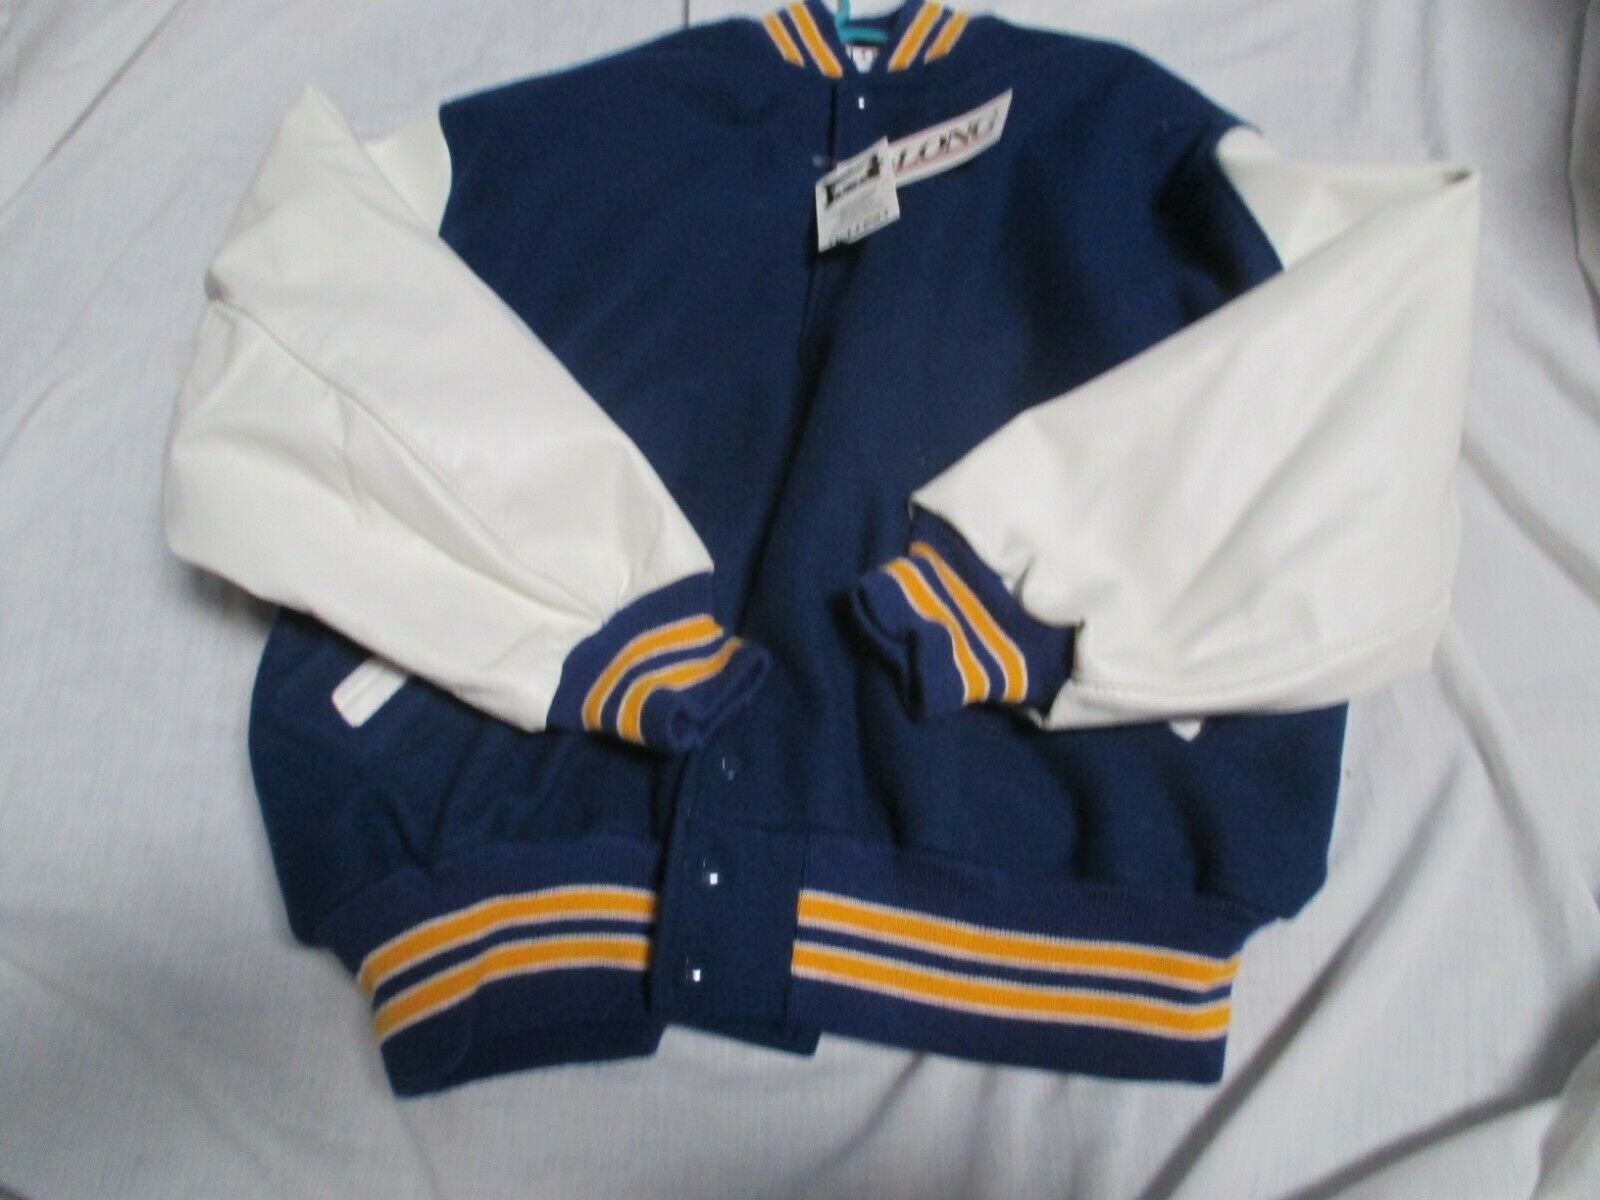 DELONG ADULT ROYAL BLUE WITH WHITE/GOLD TRIM QUILT LINED SCHOOL LETTER JACKET